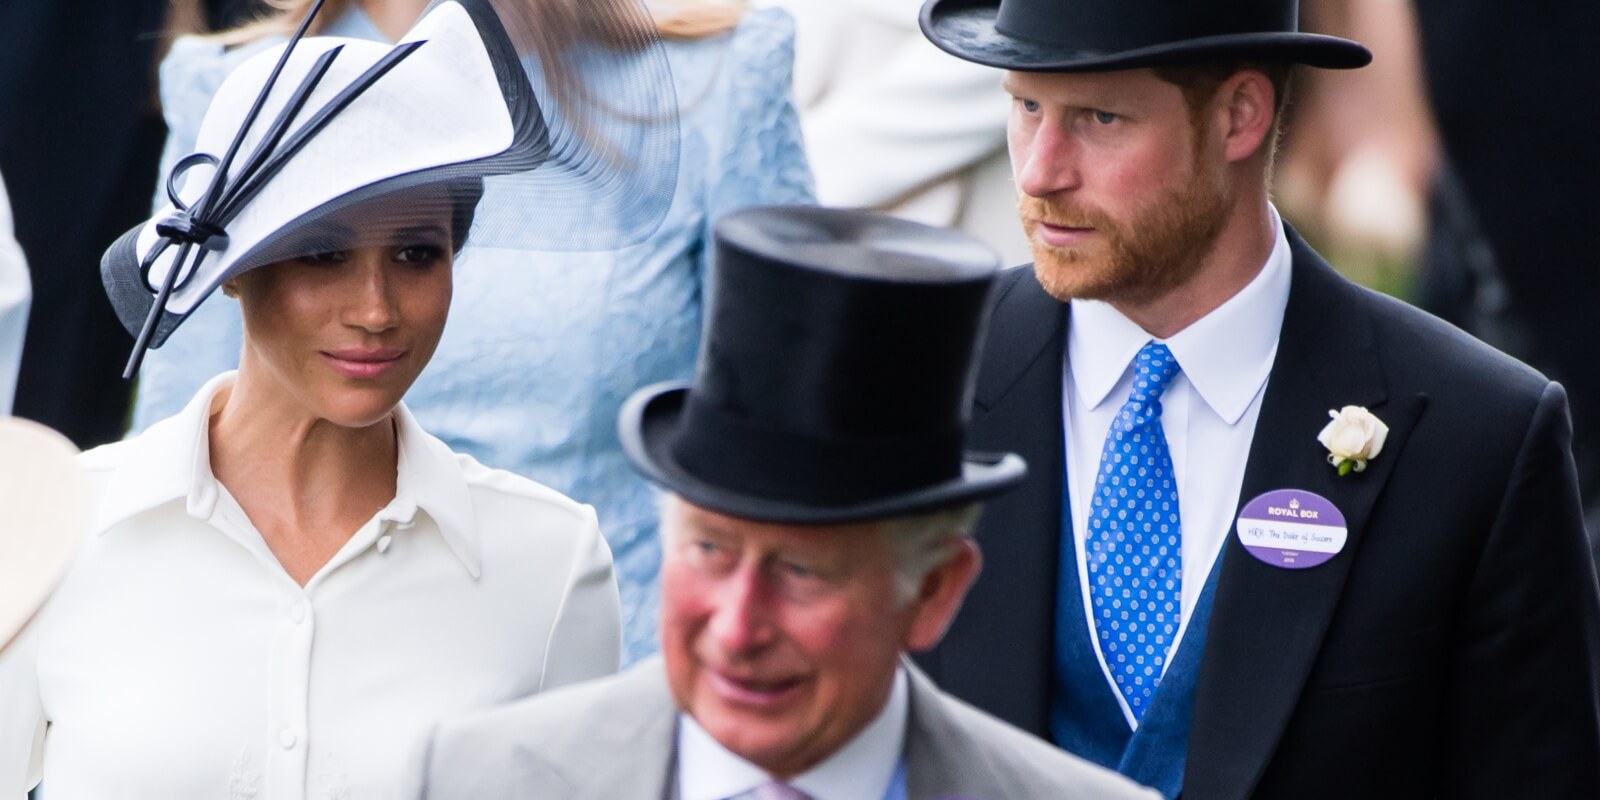 Meghan Markle, Prince Harry and King Charles attend Royal Ascot Day 1 at Ascot Racecourse on June 19, 2018 in Ascot, United Kingdom.